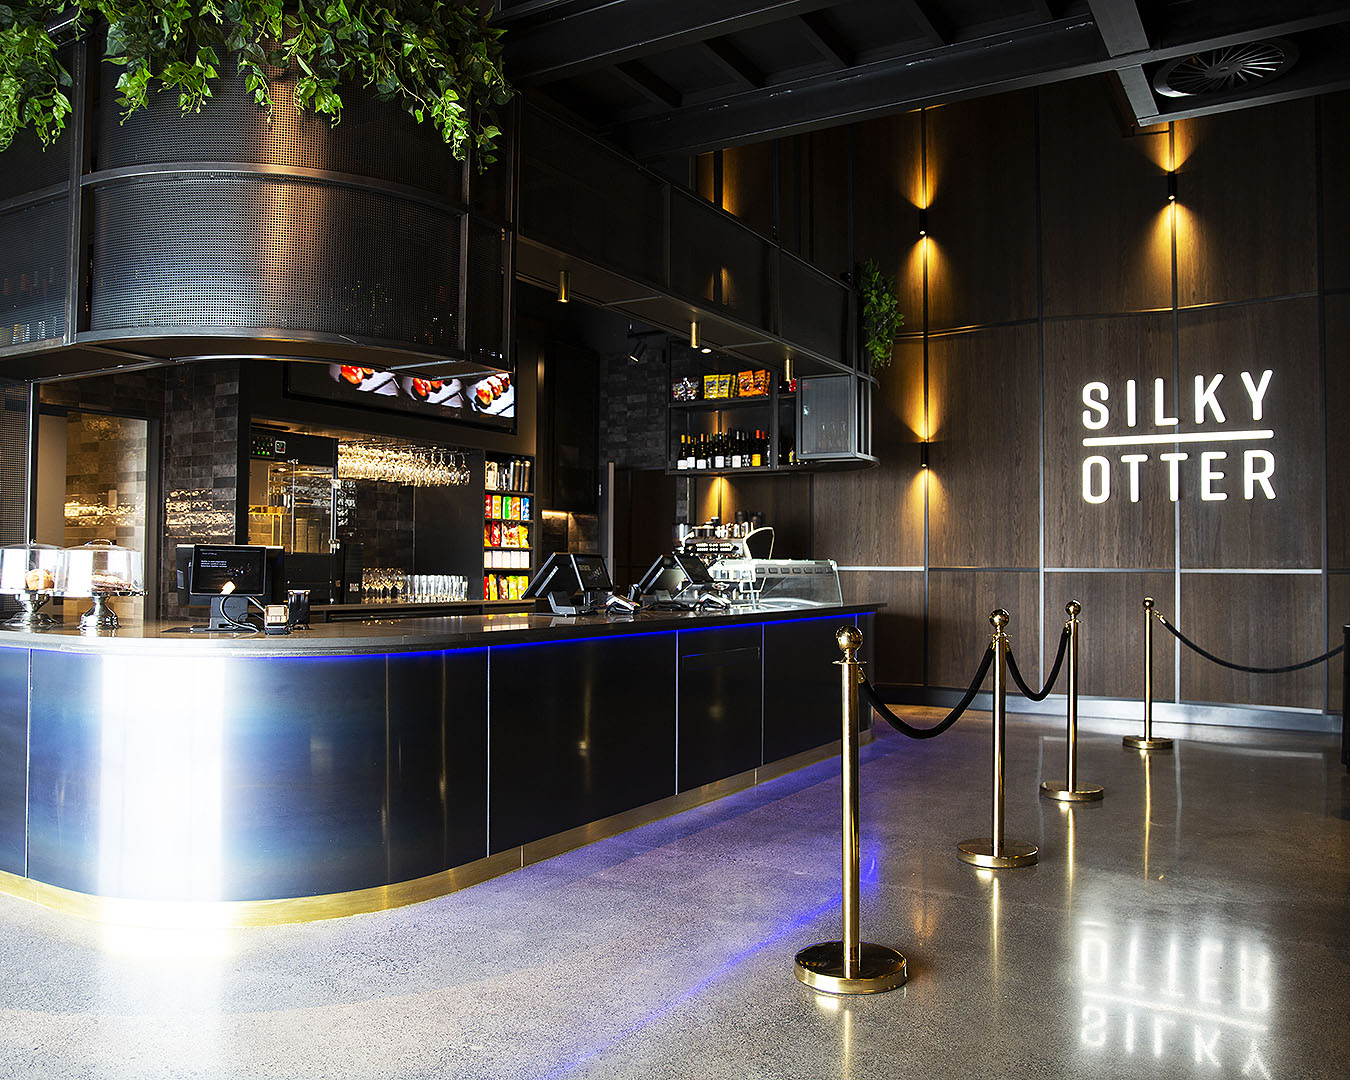 The foyer of Silky Otter in Orakei, one of the best cinemas in Auckland.